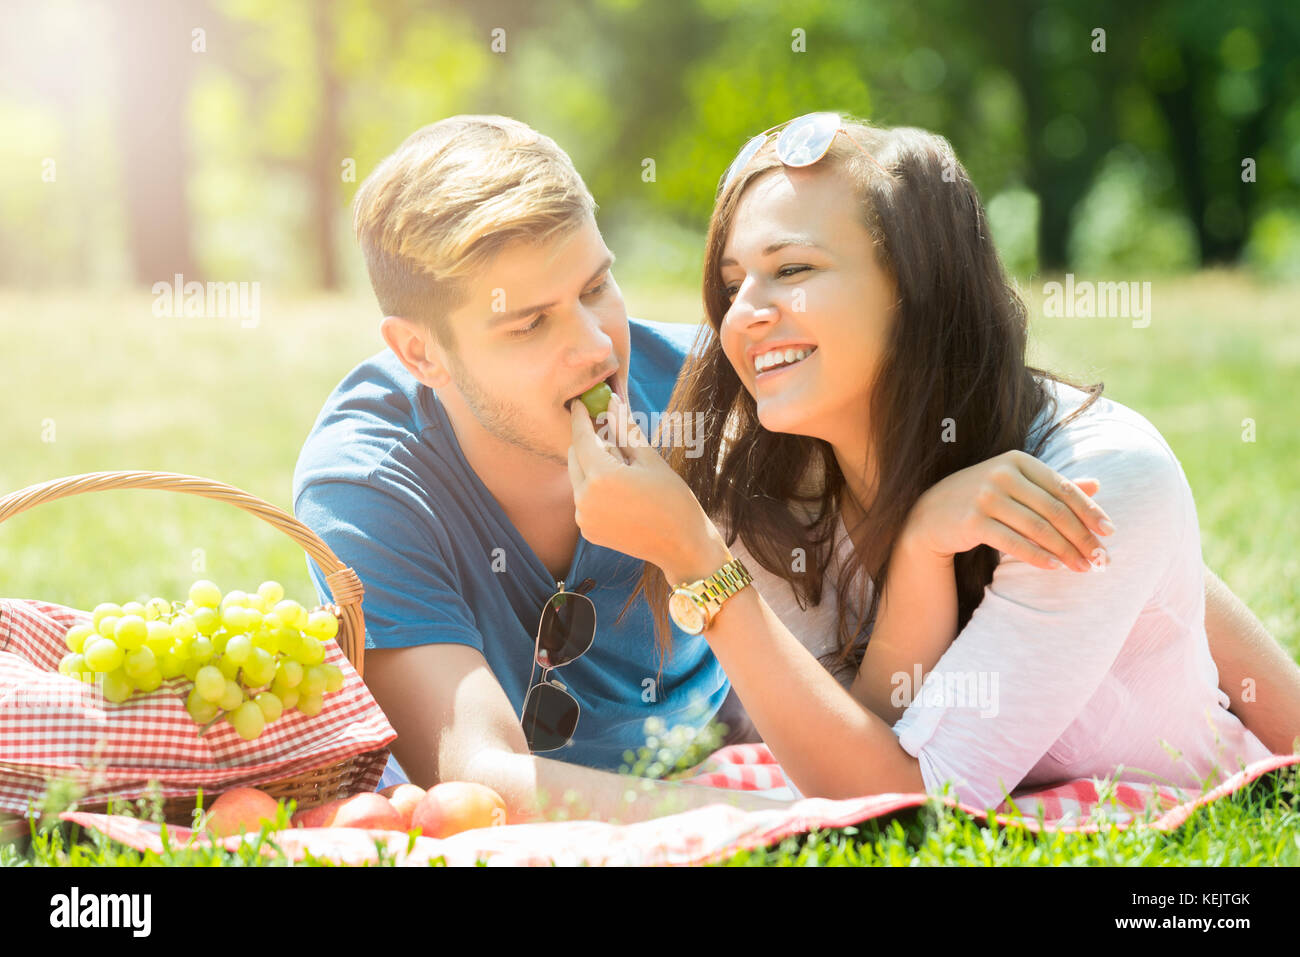 Smiling Young Woman Feeding Grape To Her Boyfriend In Park Stock Photo